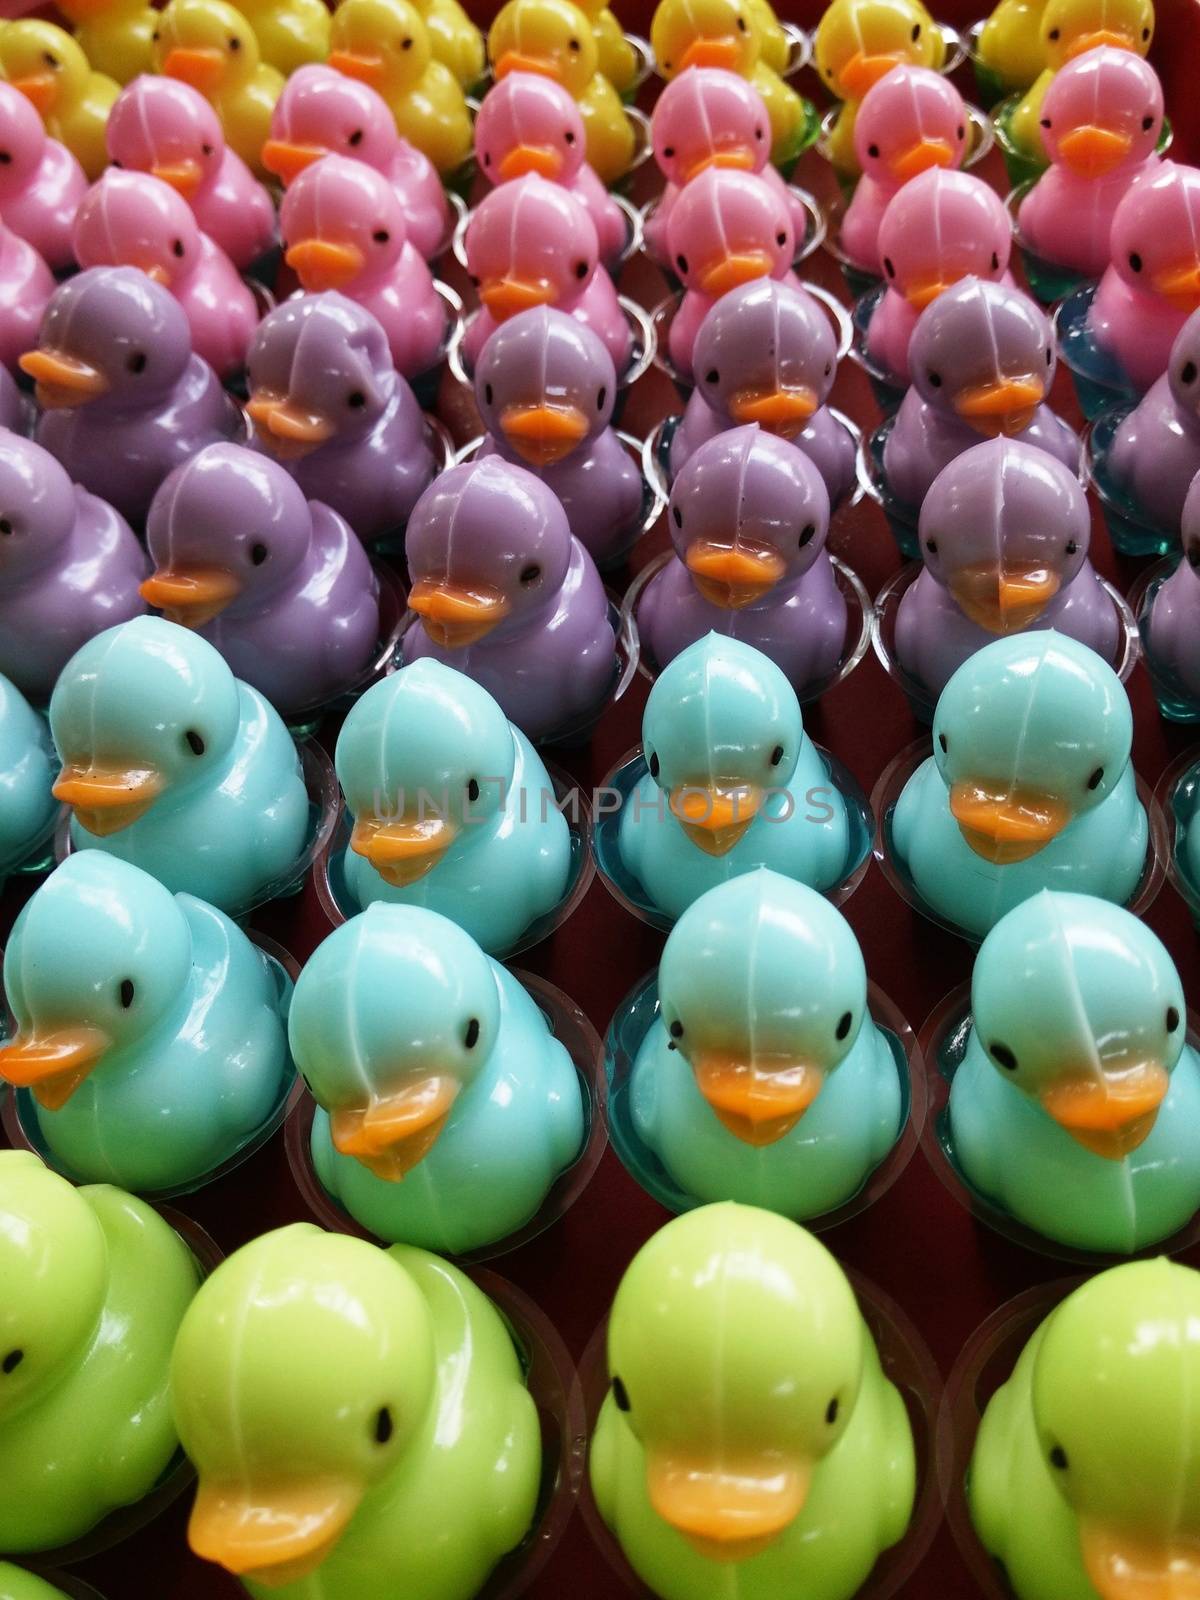 Colorful Ducks of Thai Sweet Coconut Pudding Jelly by Sevenskyx